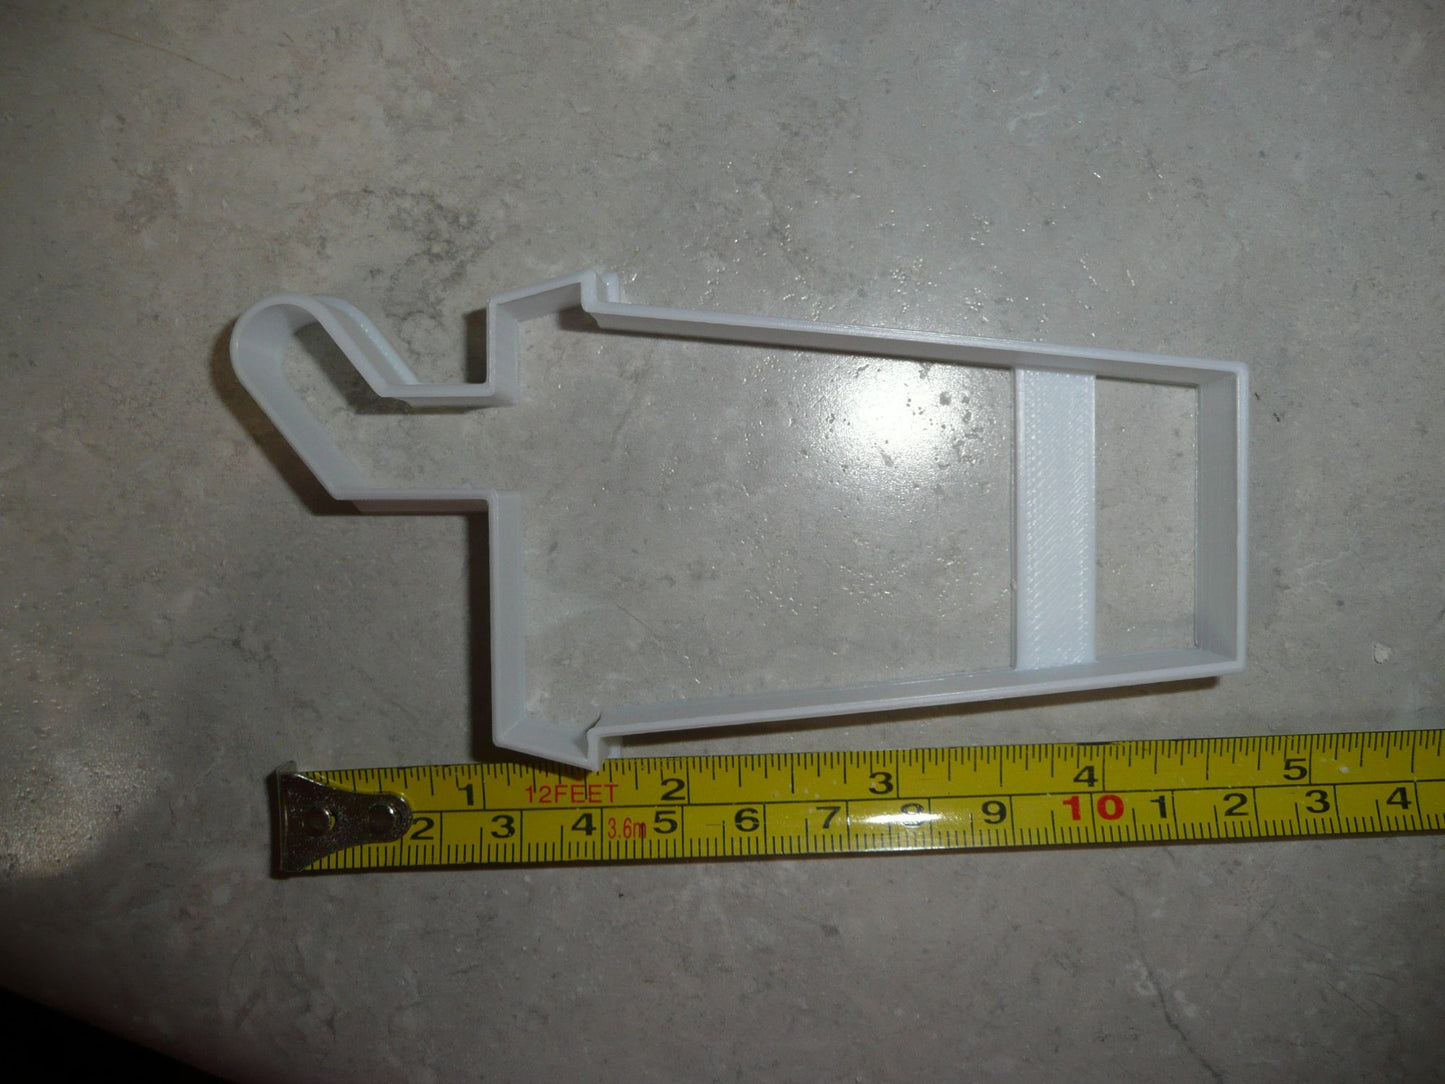 Soft Drink Cup Iced Cold Fountain Soda Pop Fast Food Cookie Cutter USA PR2874